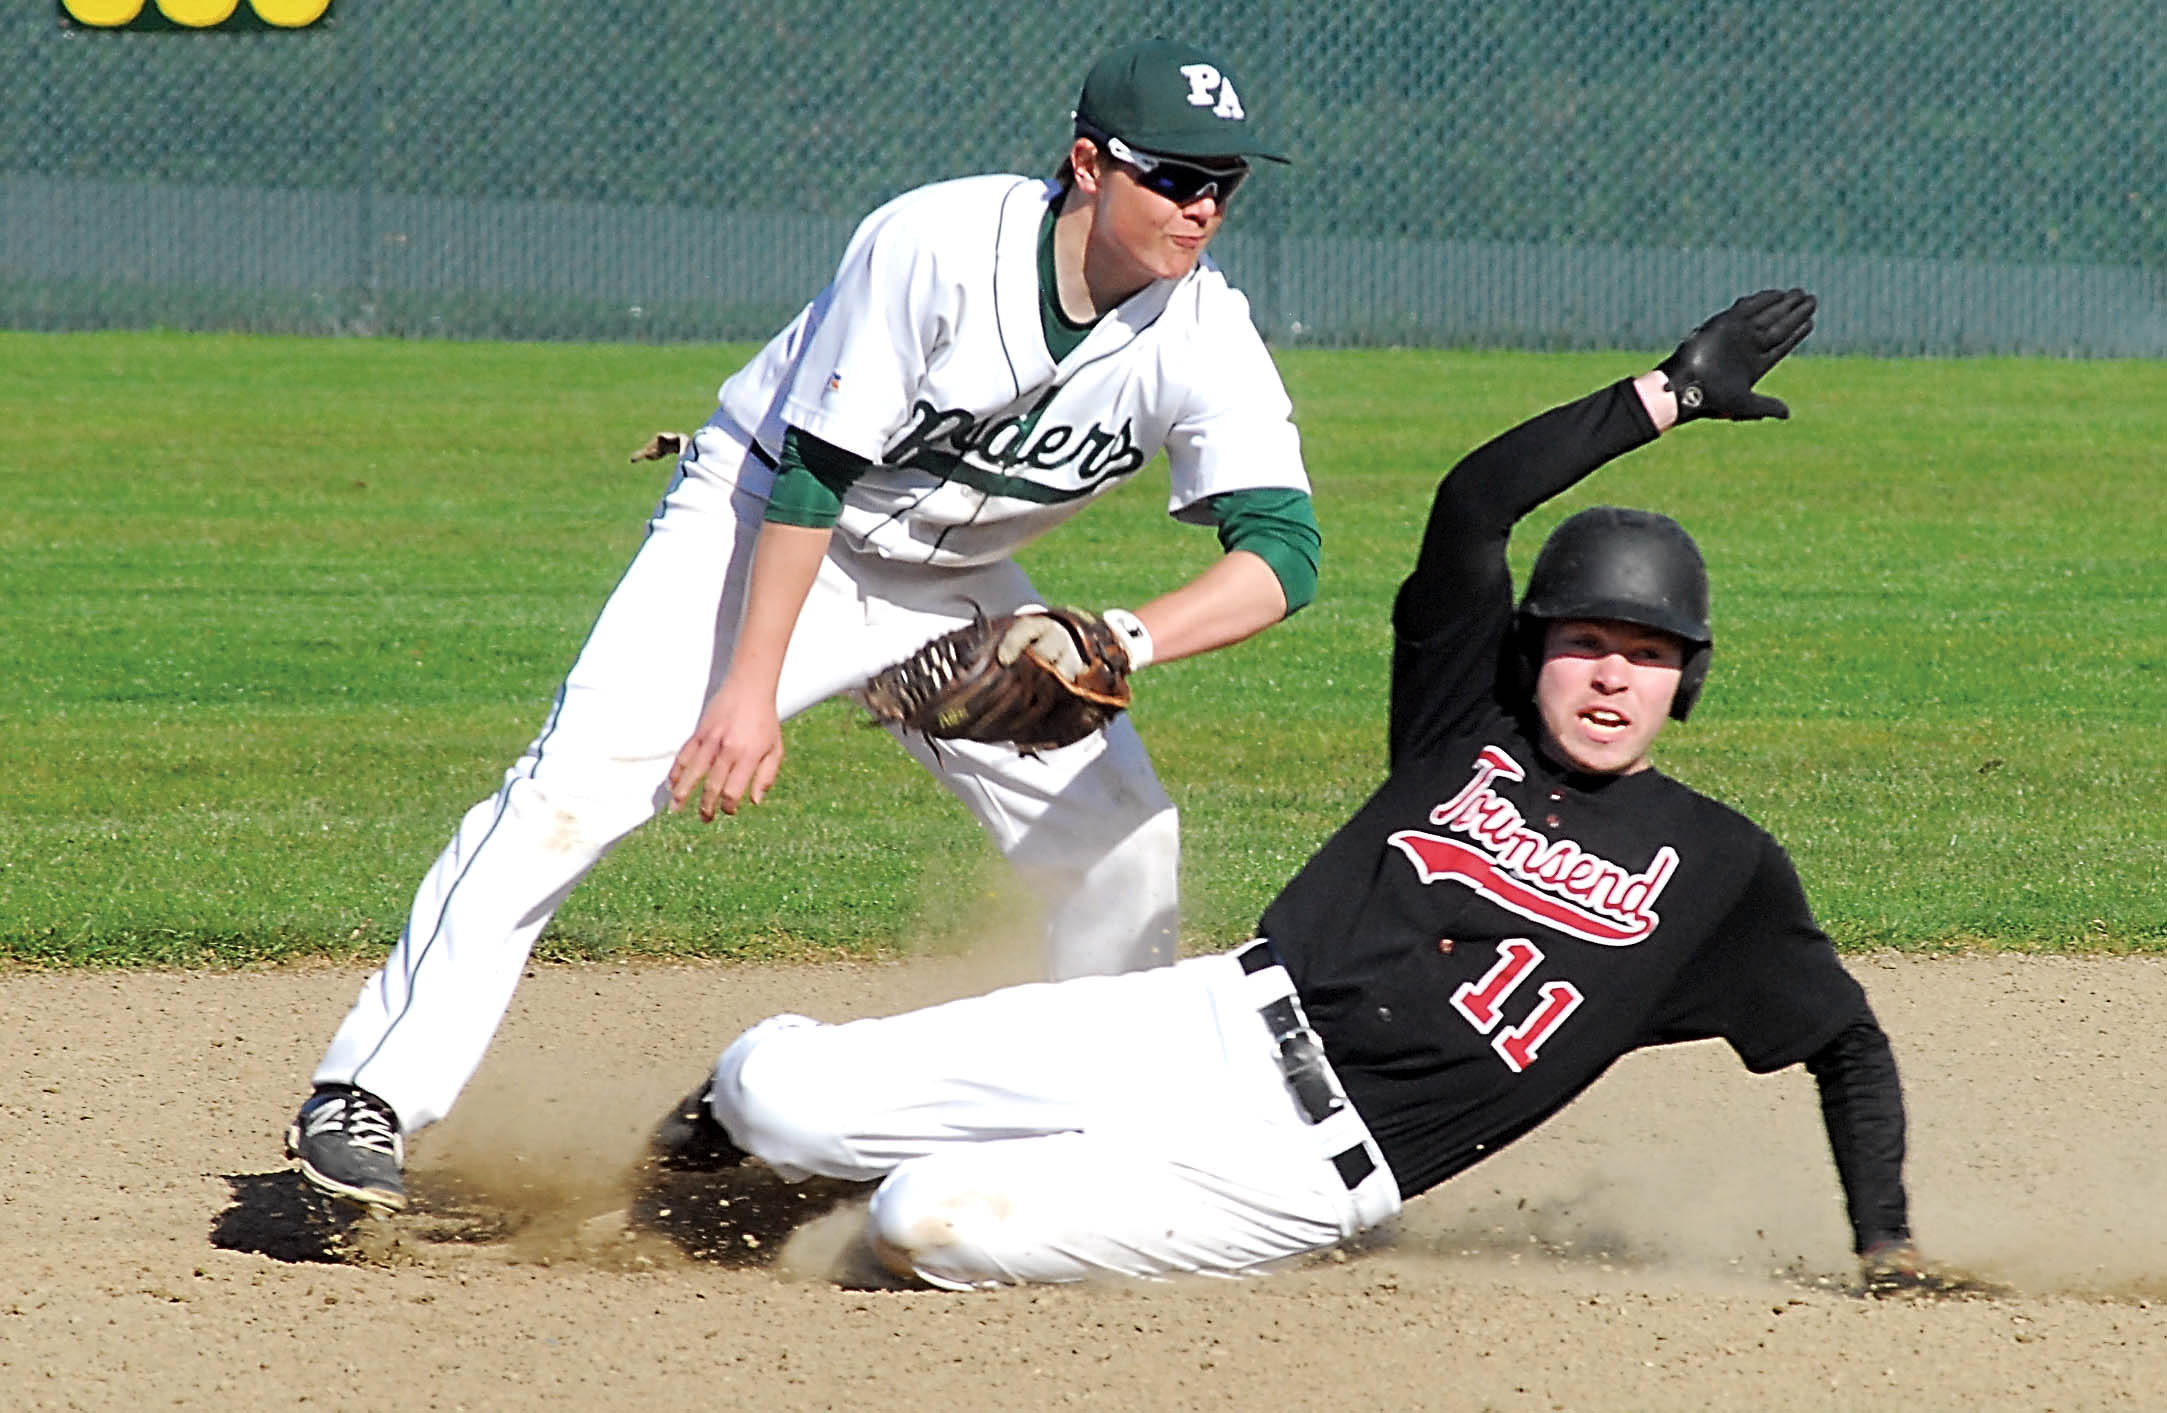 Port Townsend's Sean Dwyer looks towards the umpire after being tagged out trying to steal second base by Port Angeles's Matt Hendry. Keith Thorpe/Peninsula Daily News